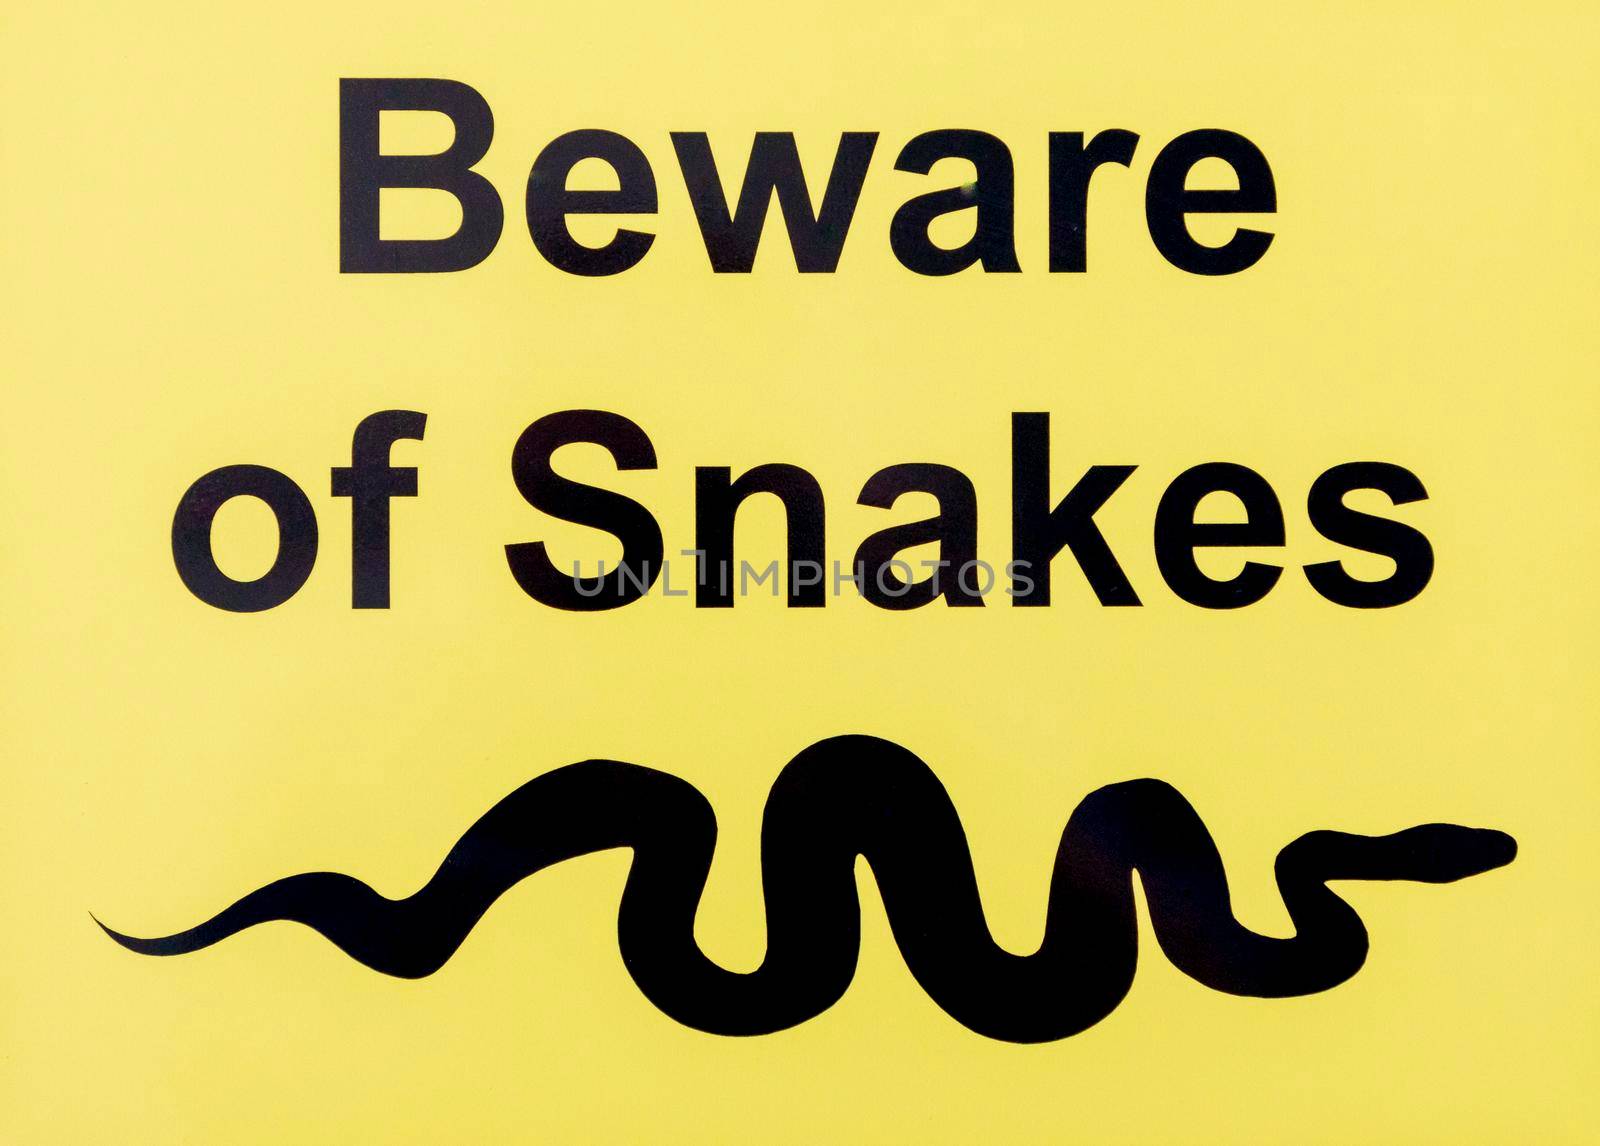 A yellow and black beware of snakes sign